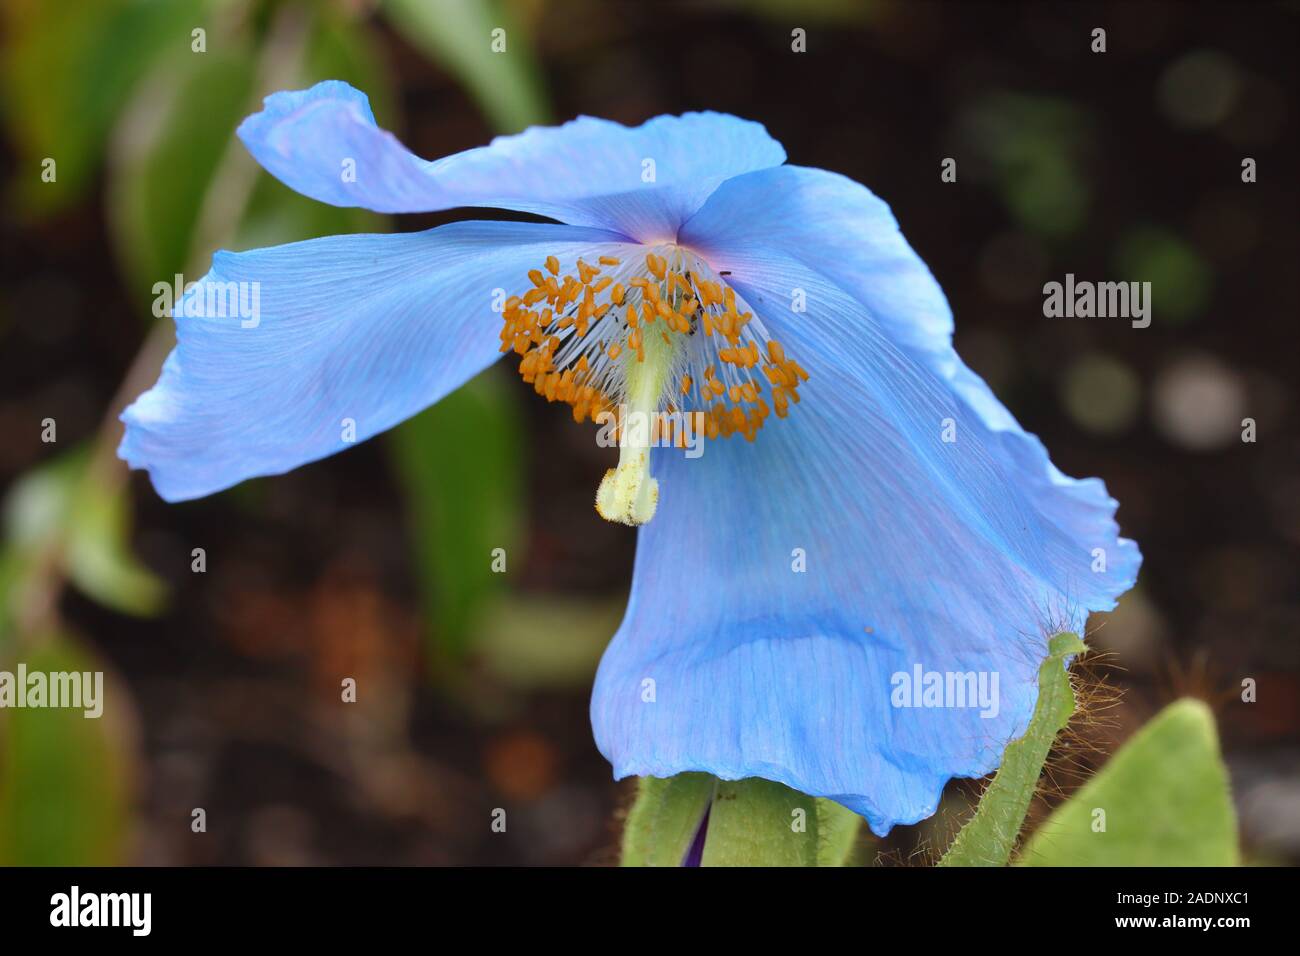 Meconopsis 'Lingholm' is a hybrid perennial poppy that is noted for producing large deep sky blue poppy flowers (to 4' across) in late spring. Stock Photo